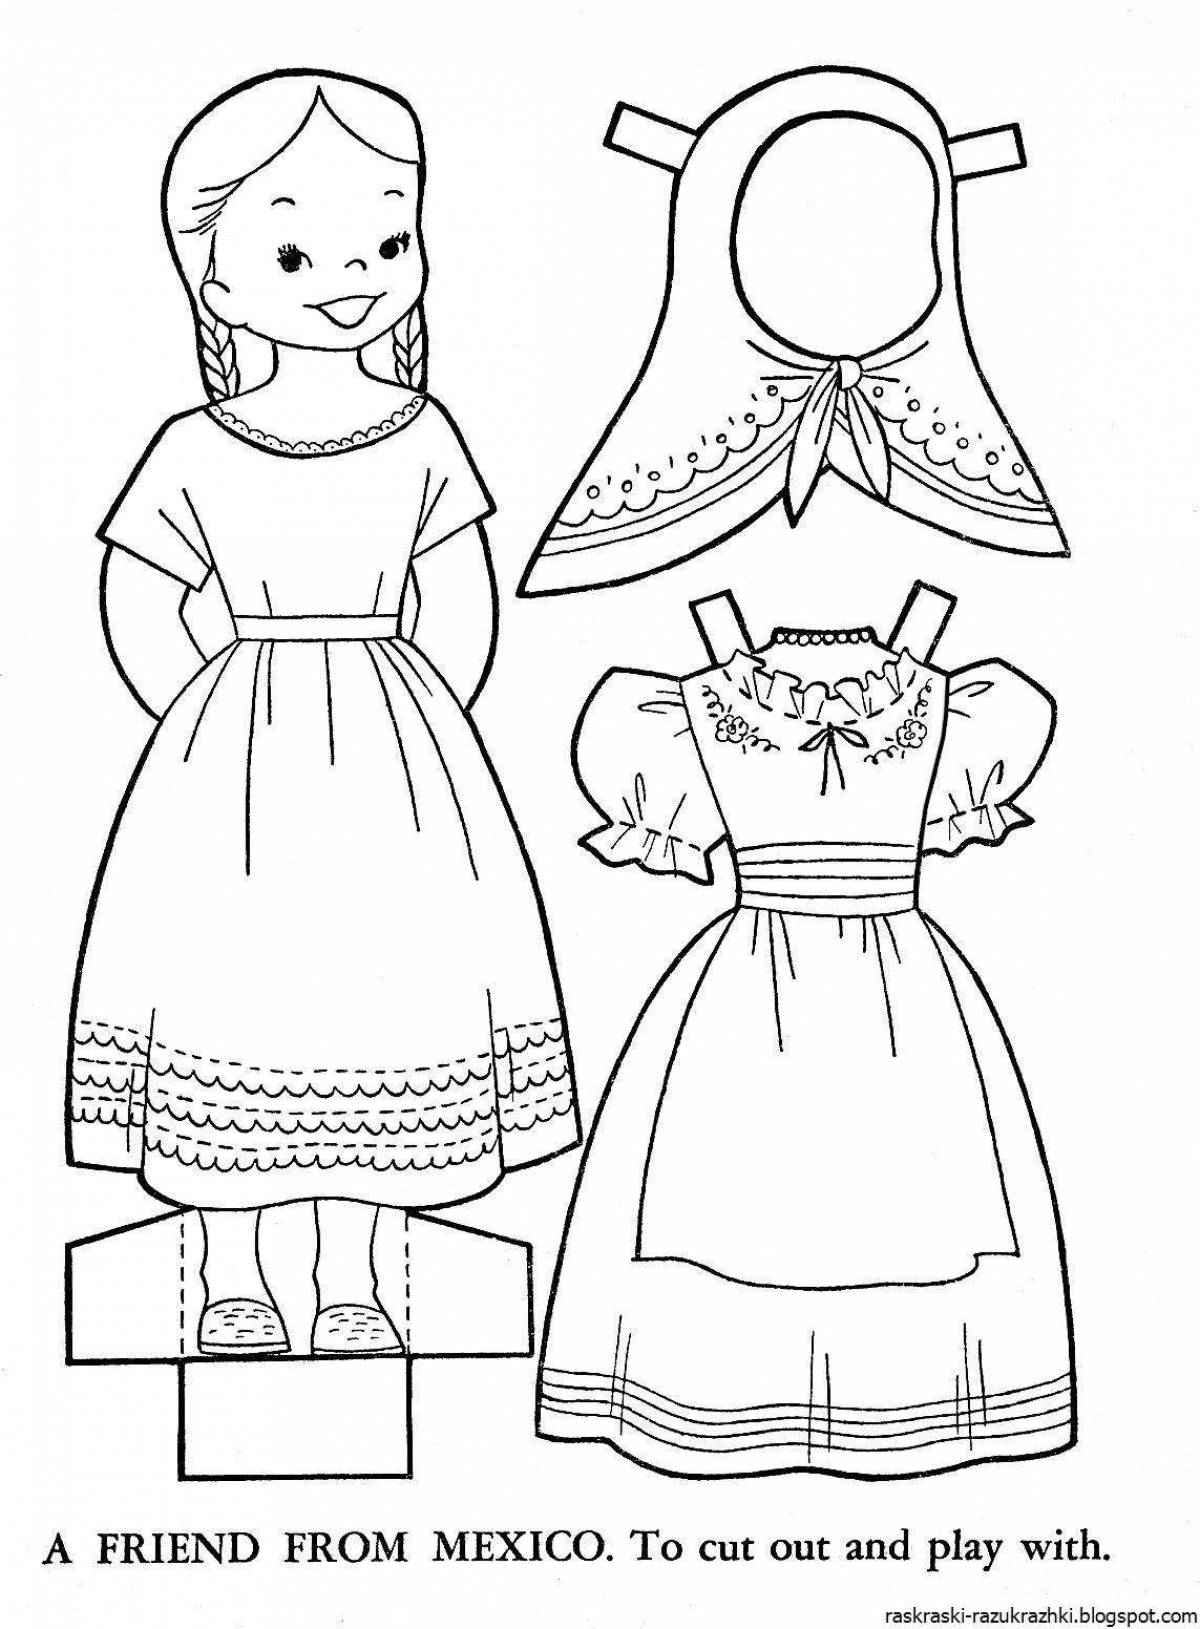 Charming Russian folk clothes coloring book for children